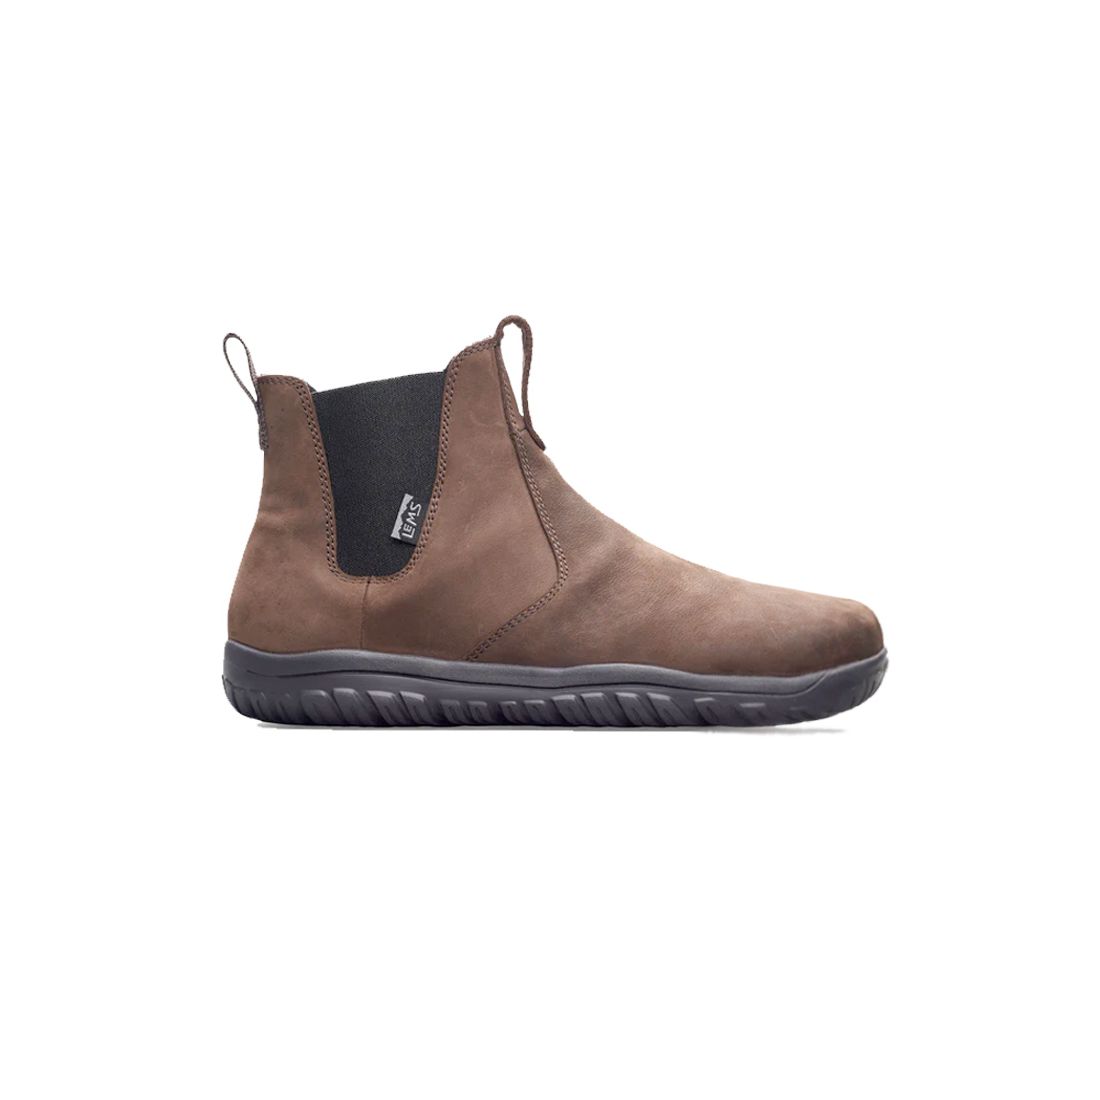 Lems Chelsea Boot Waterproof | Casual barefoot boots